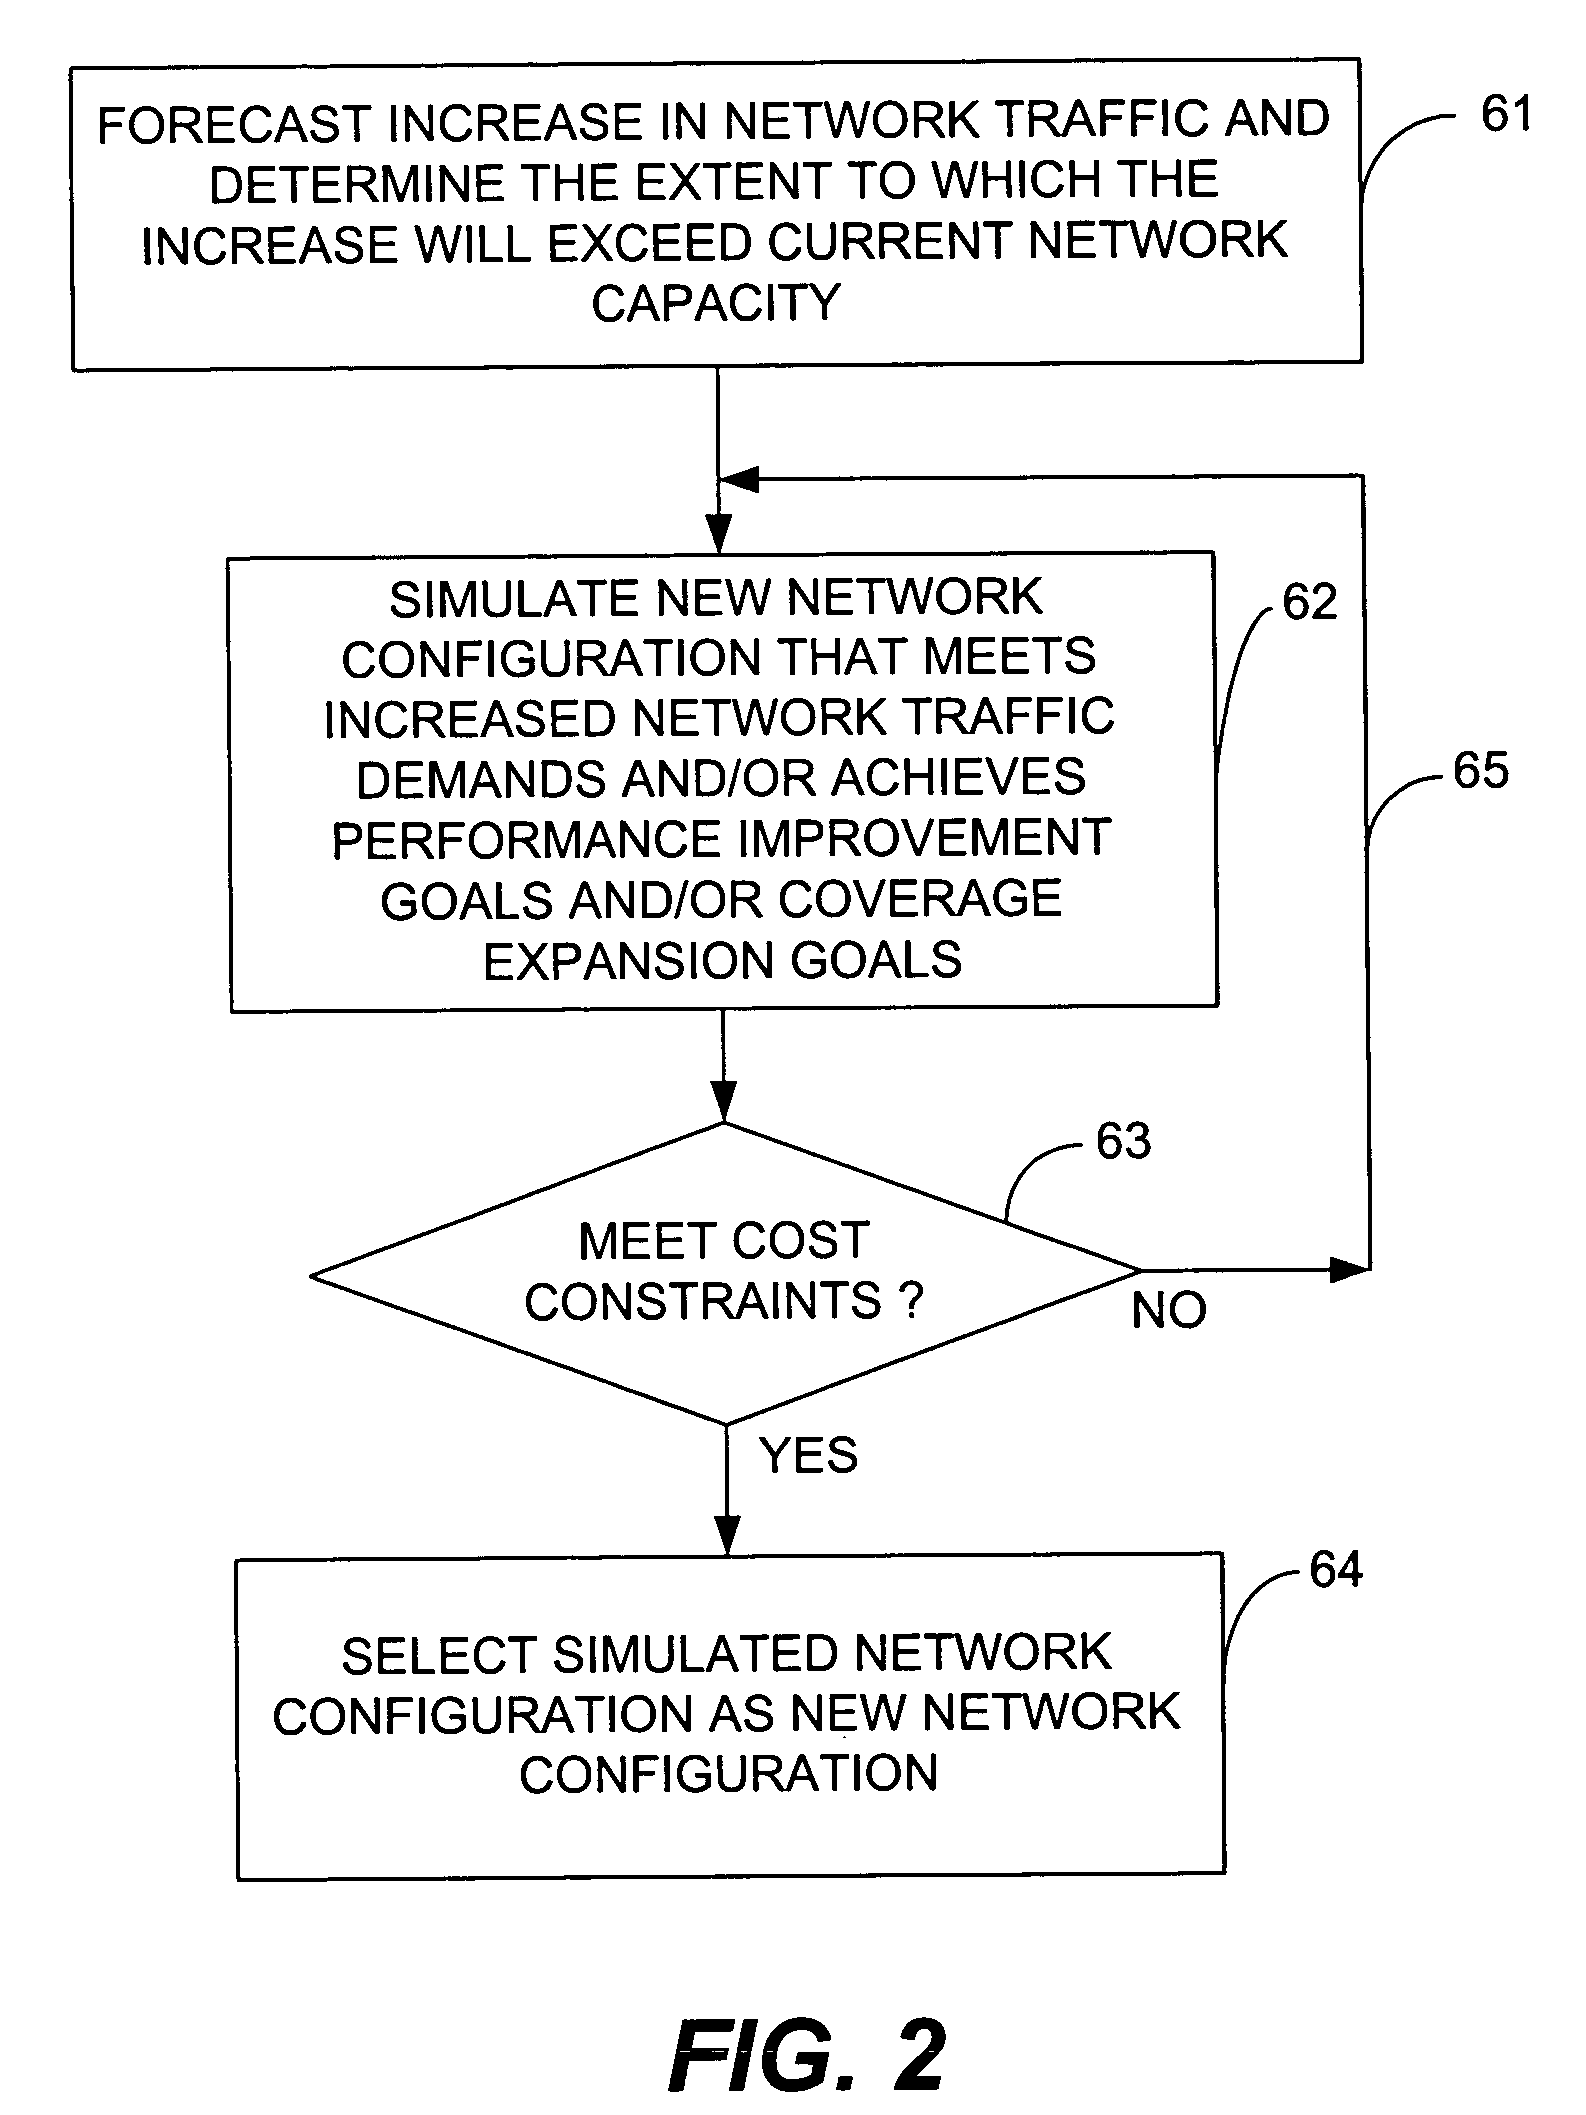 Method and apparatus for automatically determining the manner in which to allocate available capital to achieve a desired level of network quality performance